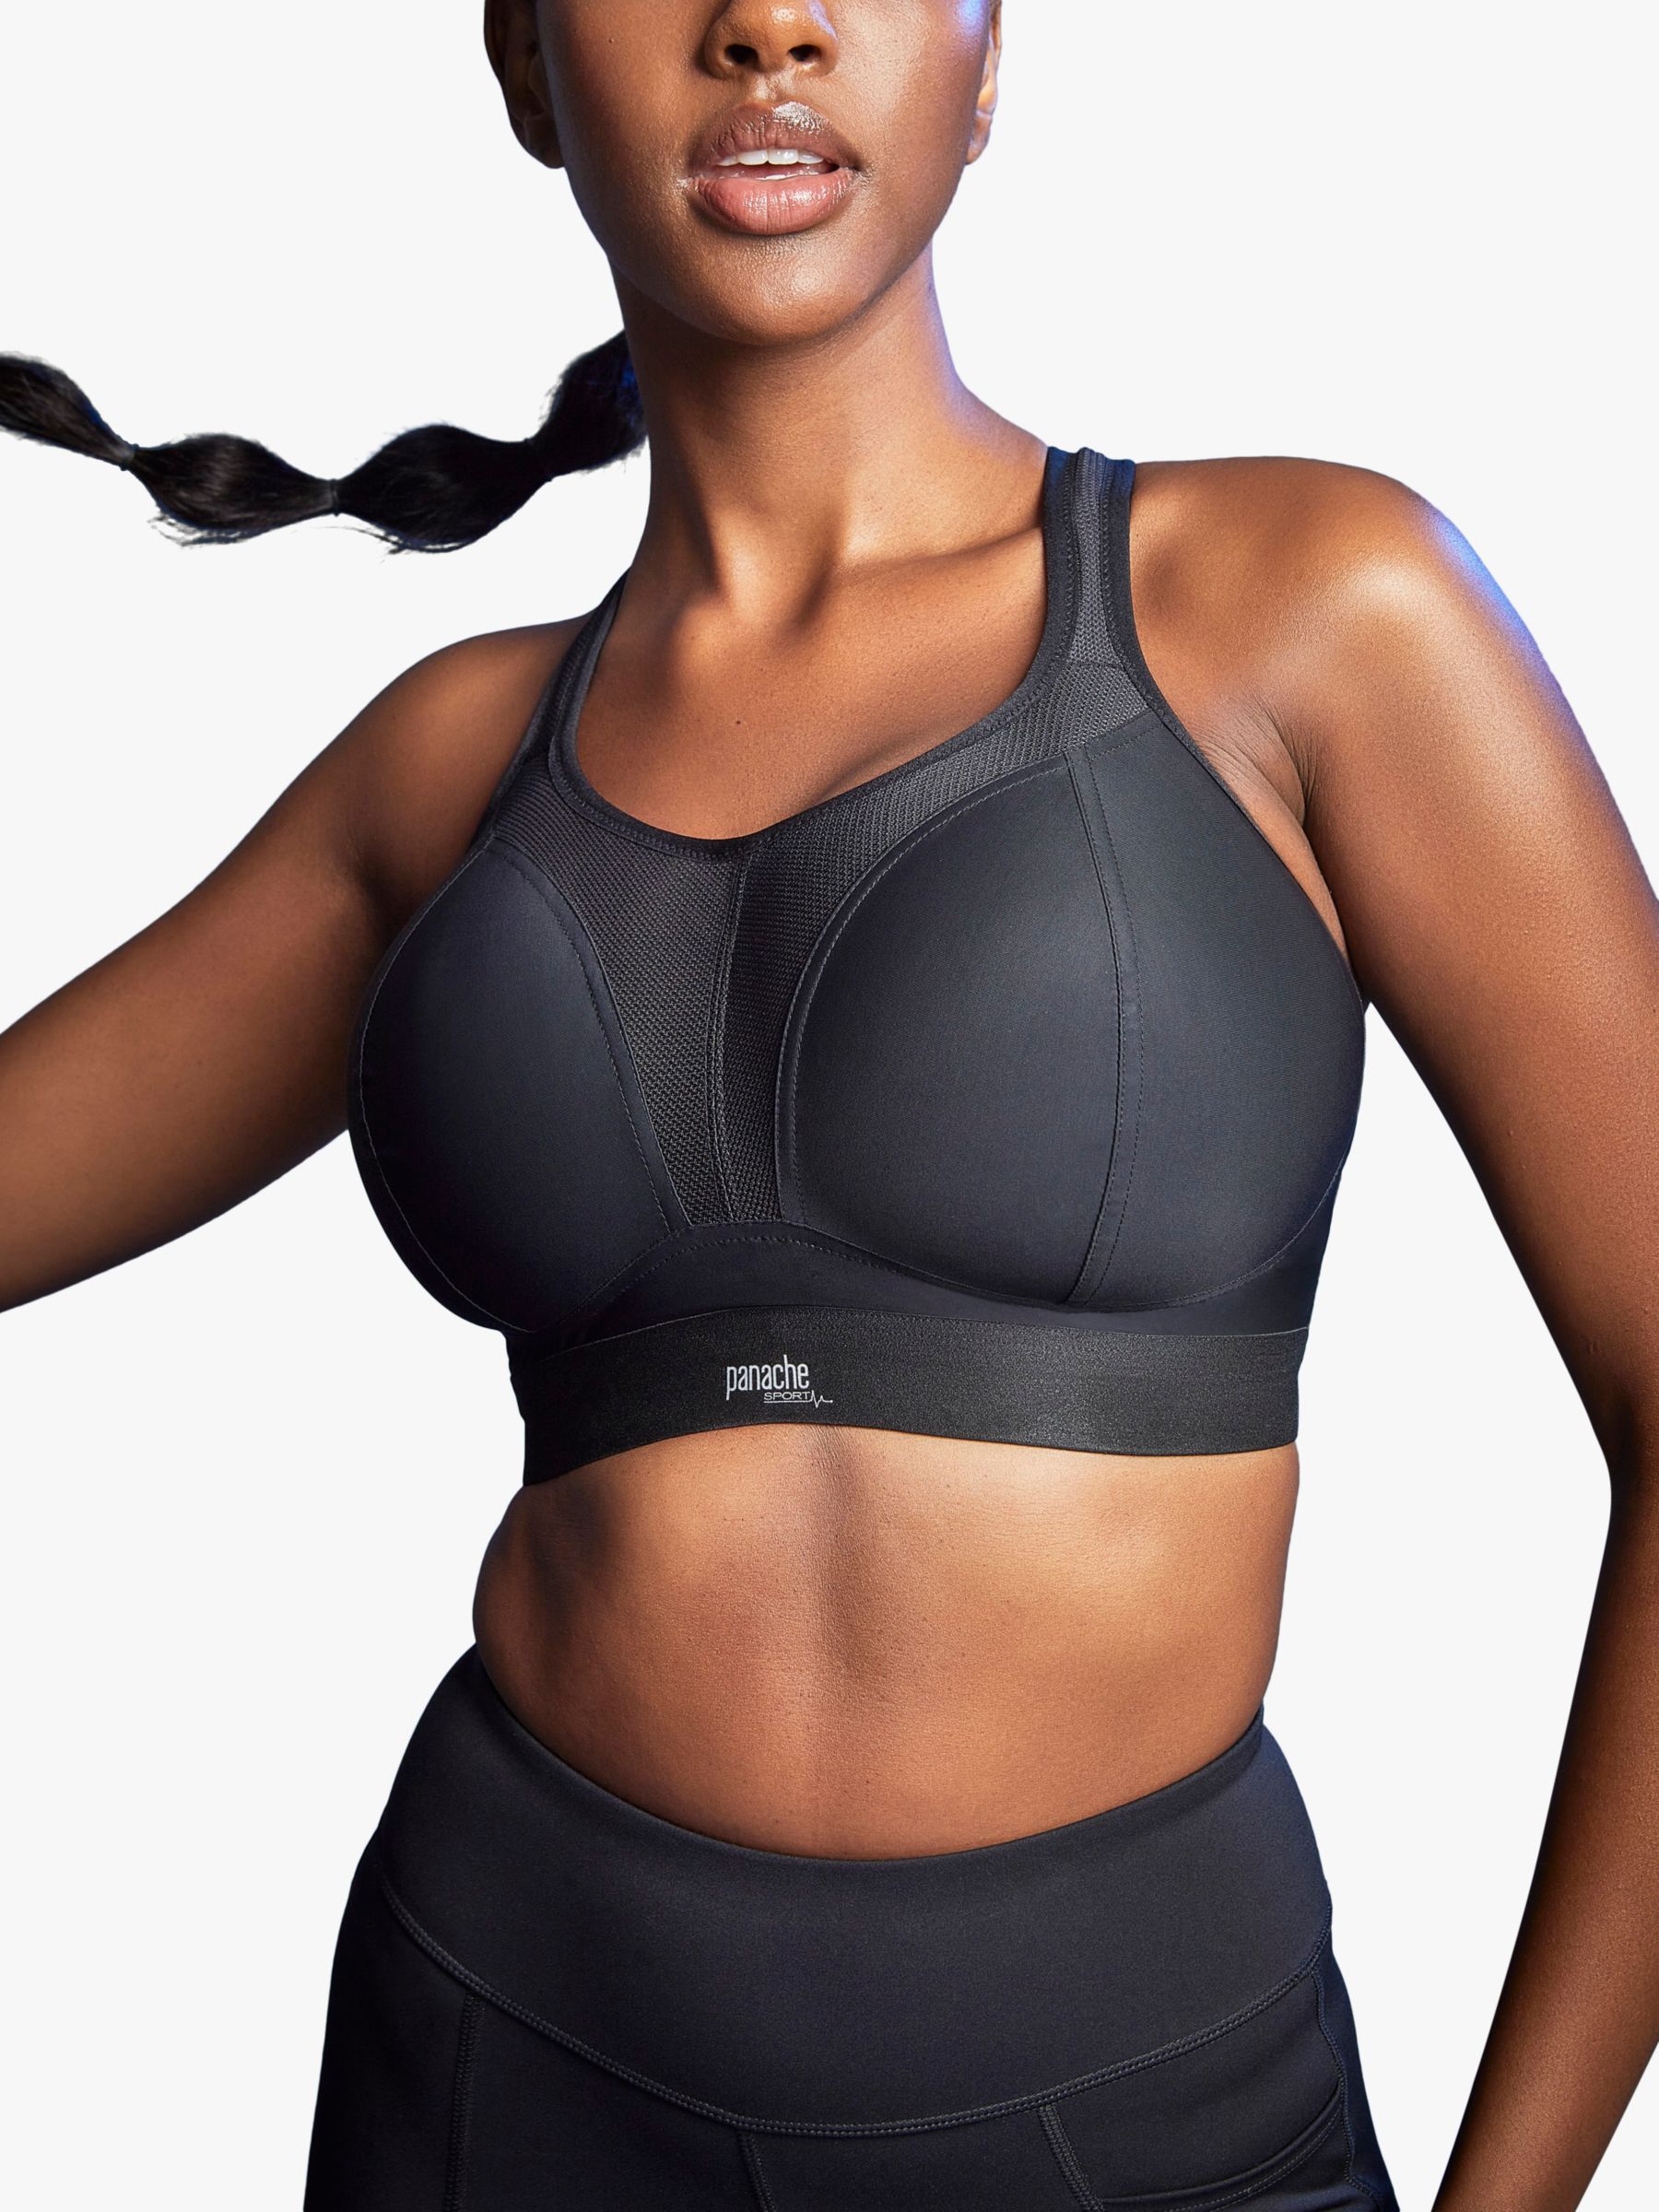 PANACHE sports bra  For ultimate non-wired support